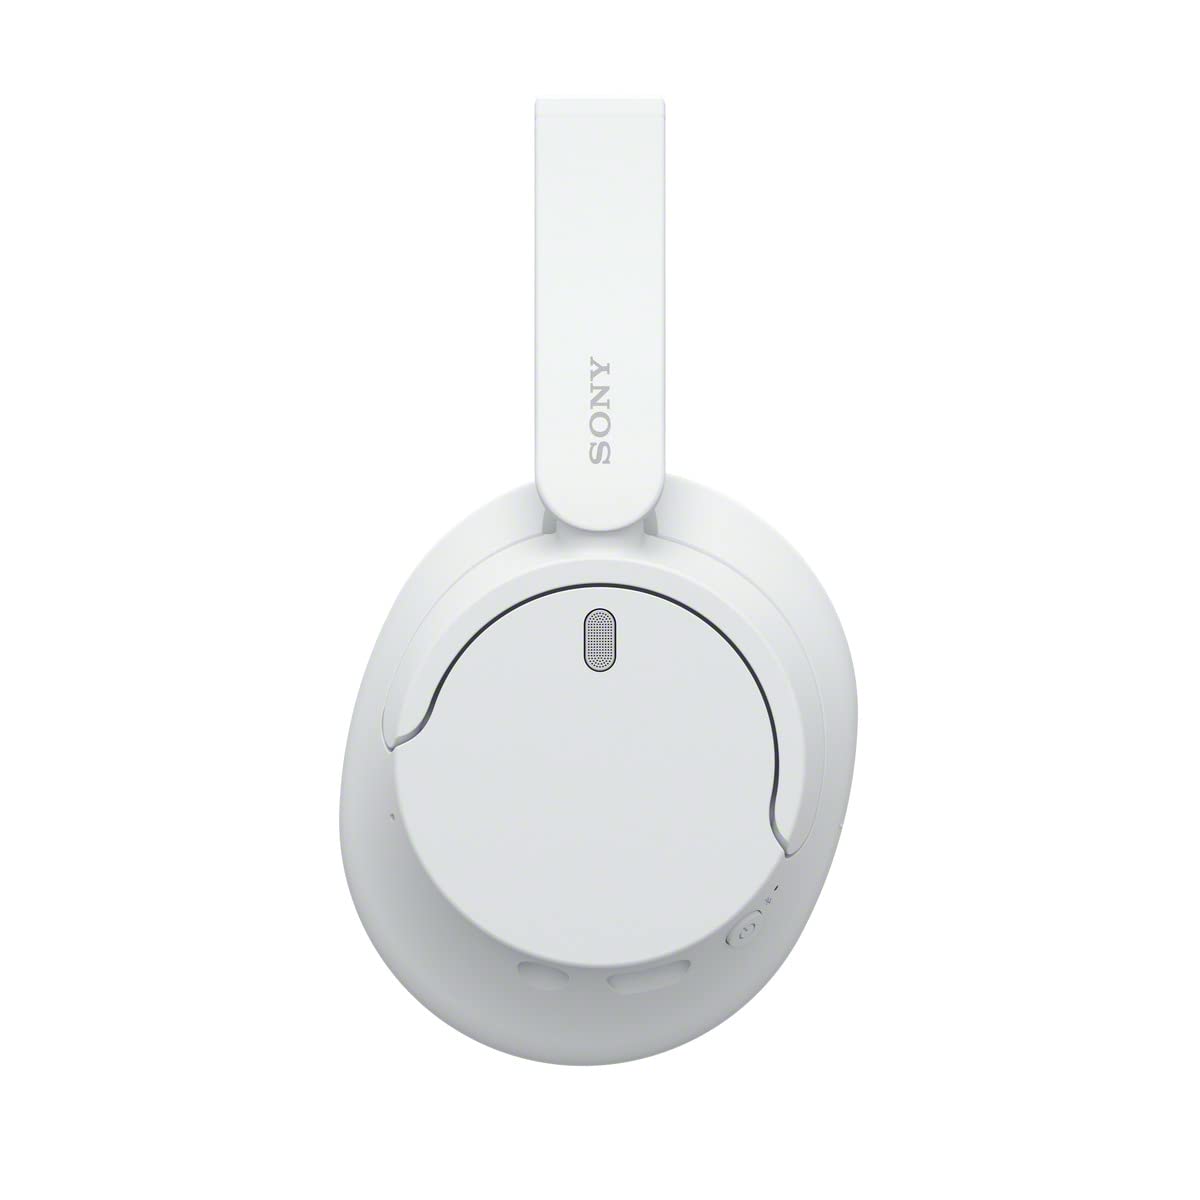 Sony WH-CH720N Noise Canceling Wireless Headphones Bluetooth Over The Ear Headset with Microphone and Alexa Built-in, White New